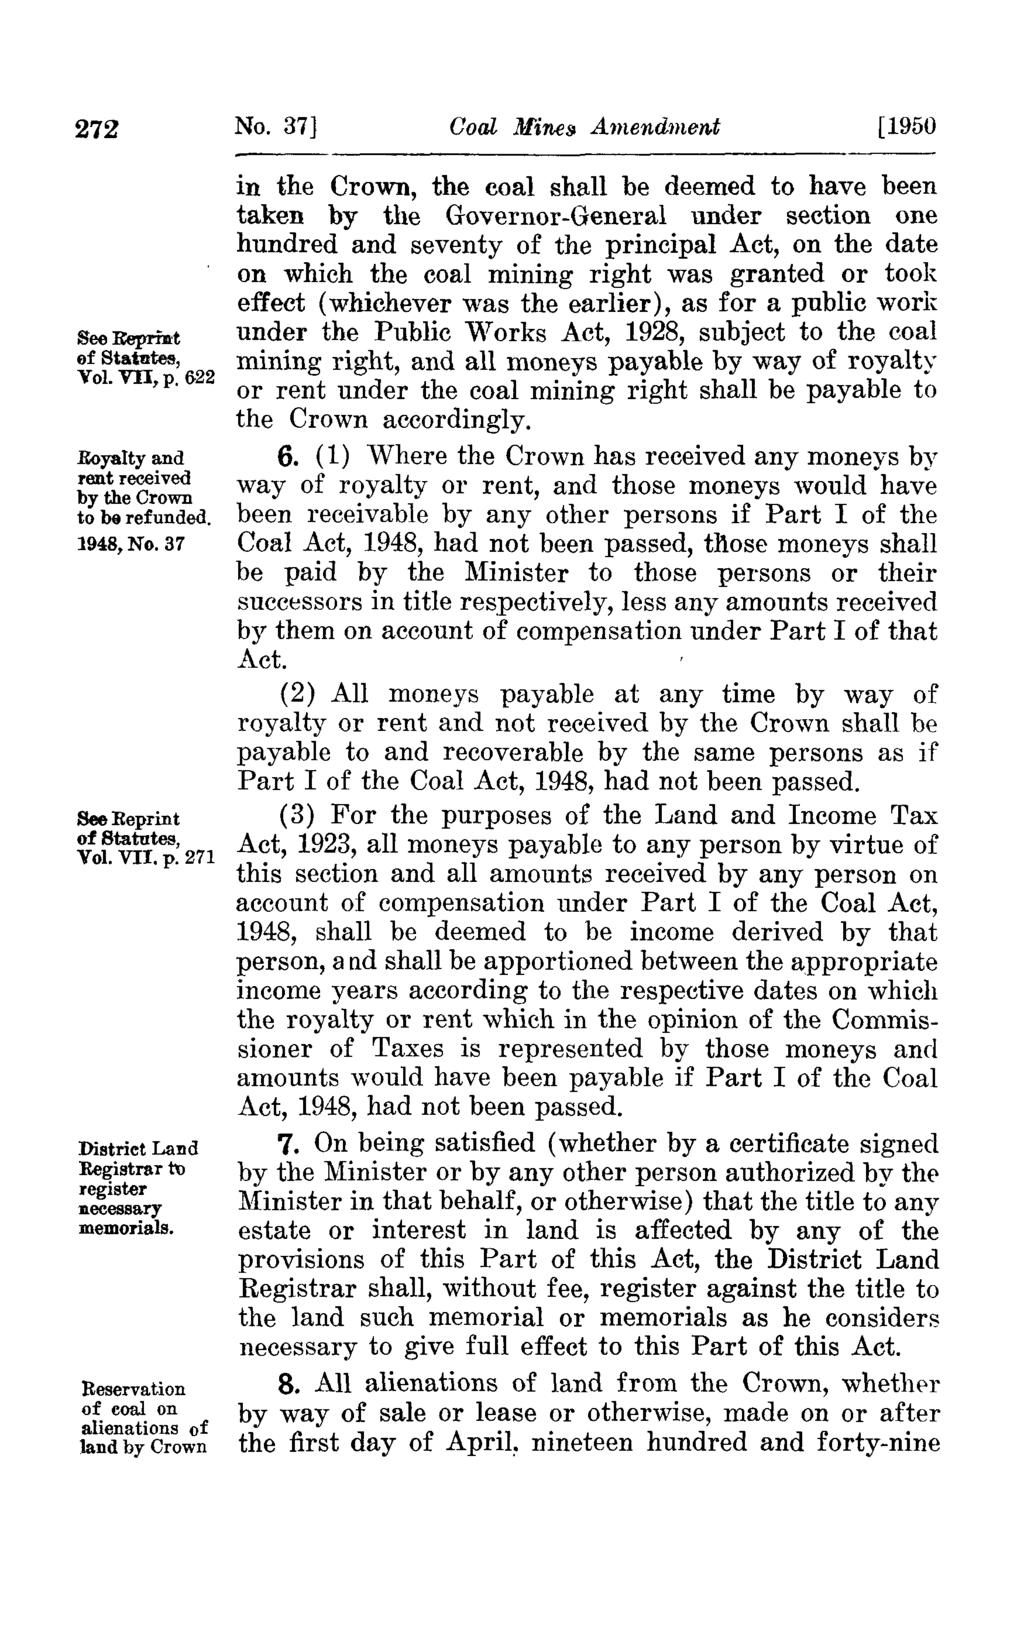 272 See RepriJtt of Statutes, Vol. VII, p. 622 Royalty and rent received by the Crown to be refunded. 1948, No. 37 See Reprint of Statutes, Vol. VII. p. 271 District Land Registrar hl register necessary memorials.